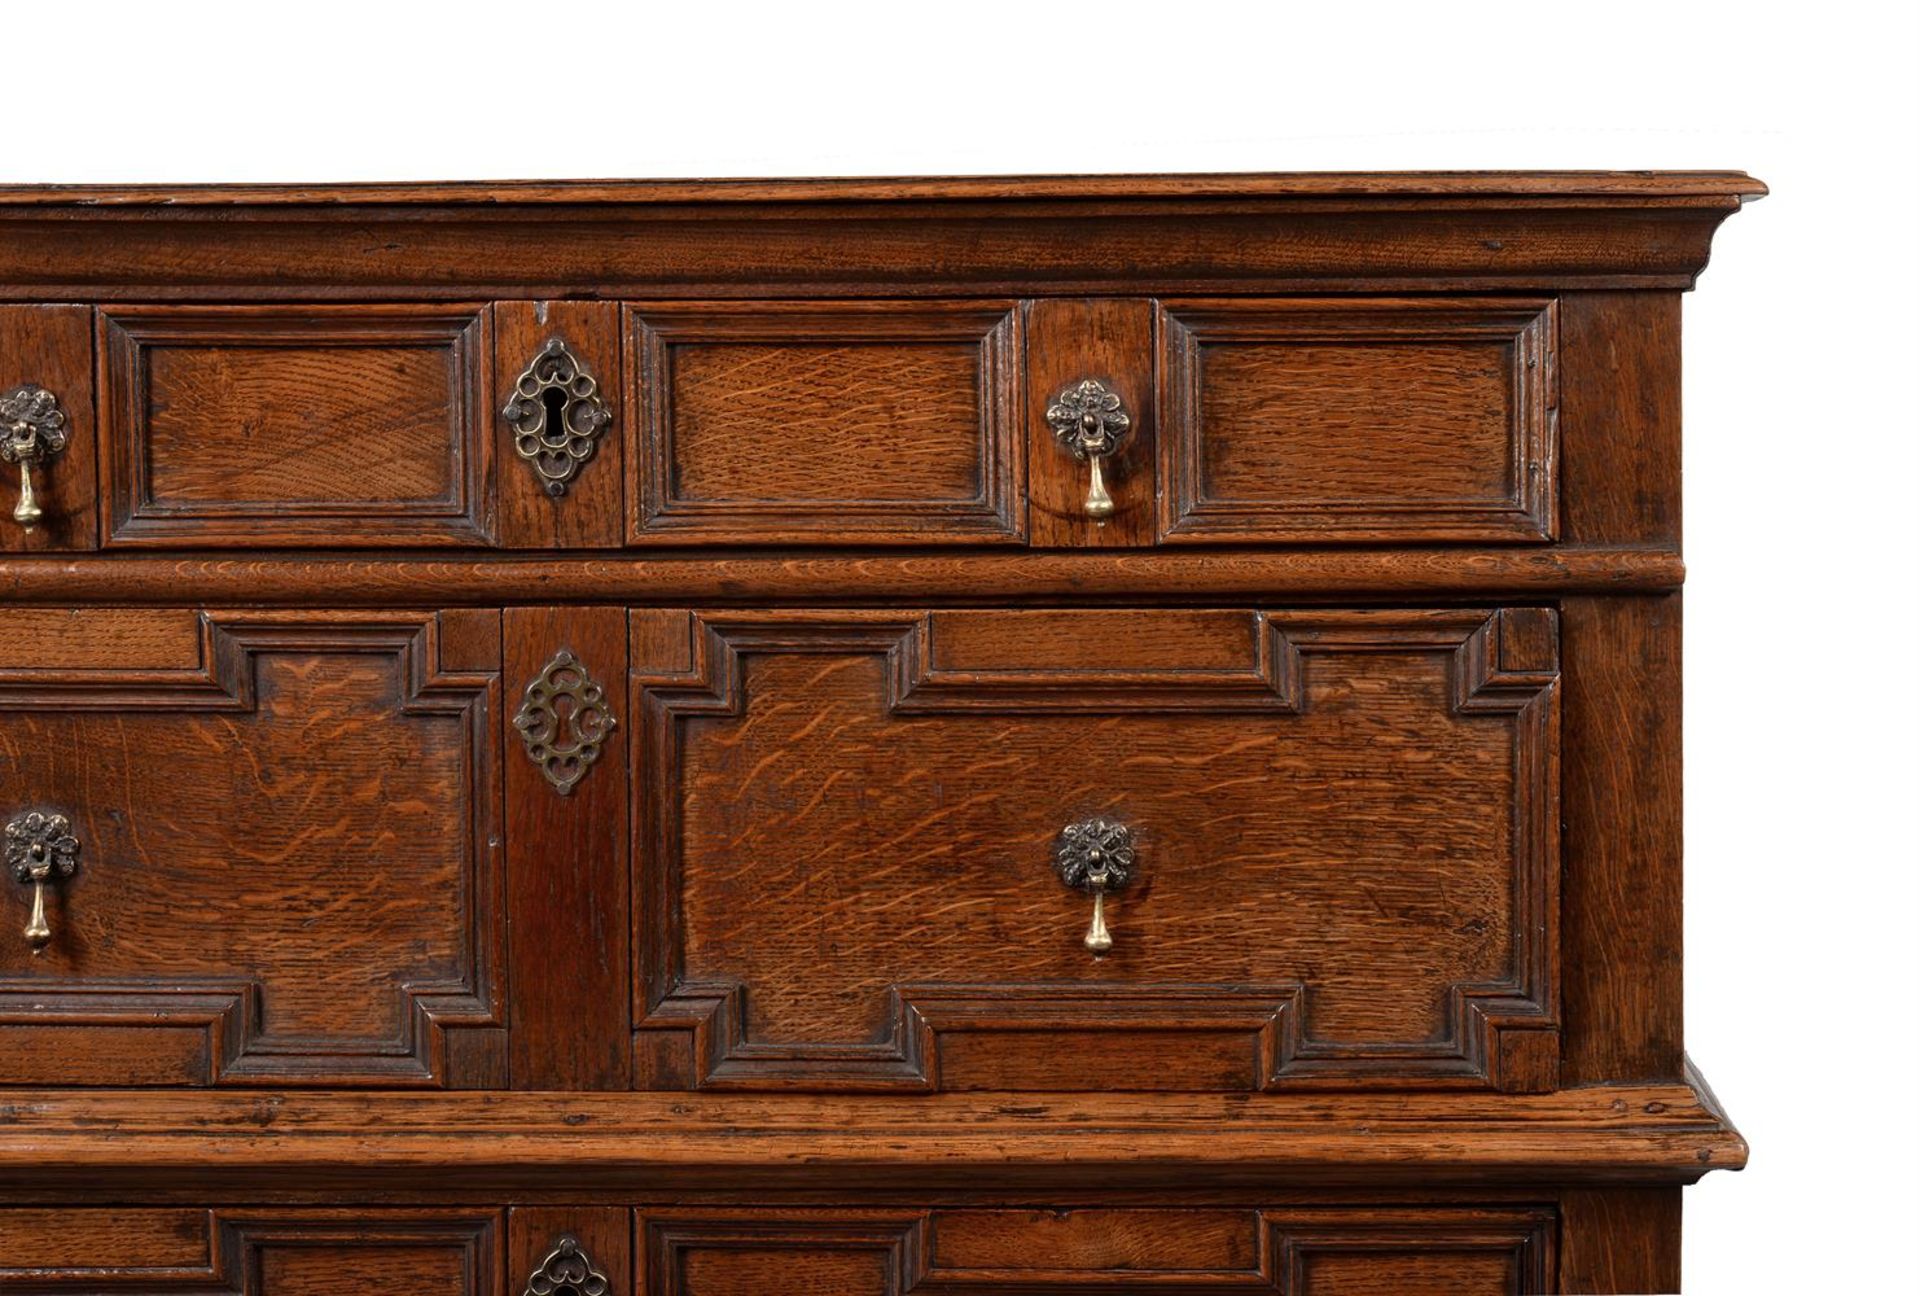 A CHARLES II OAK CHEST OF DRAWERS, LATE 17TH CENTURY - Image 3 of 4